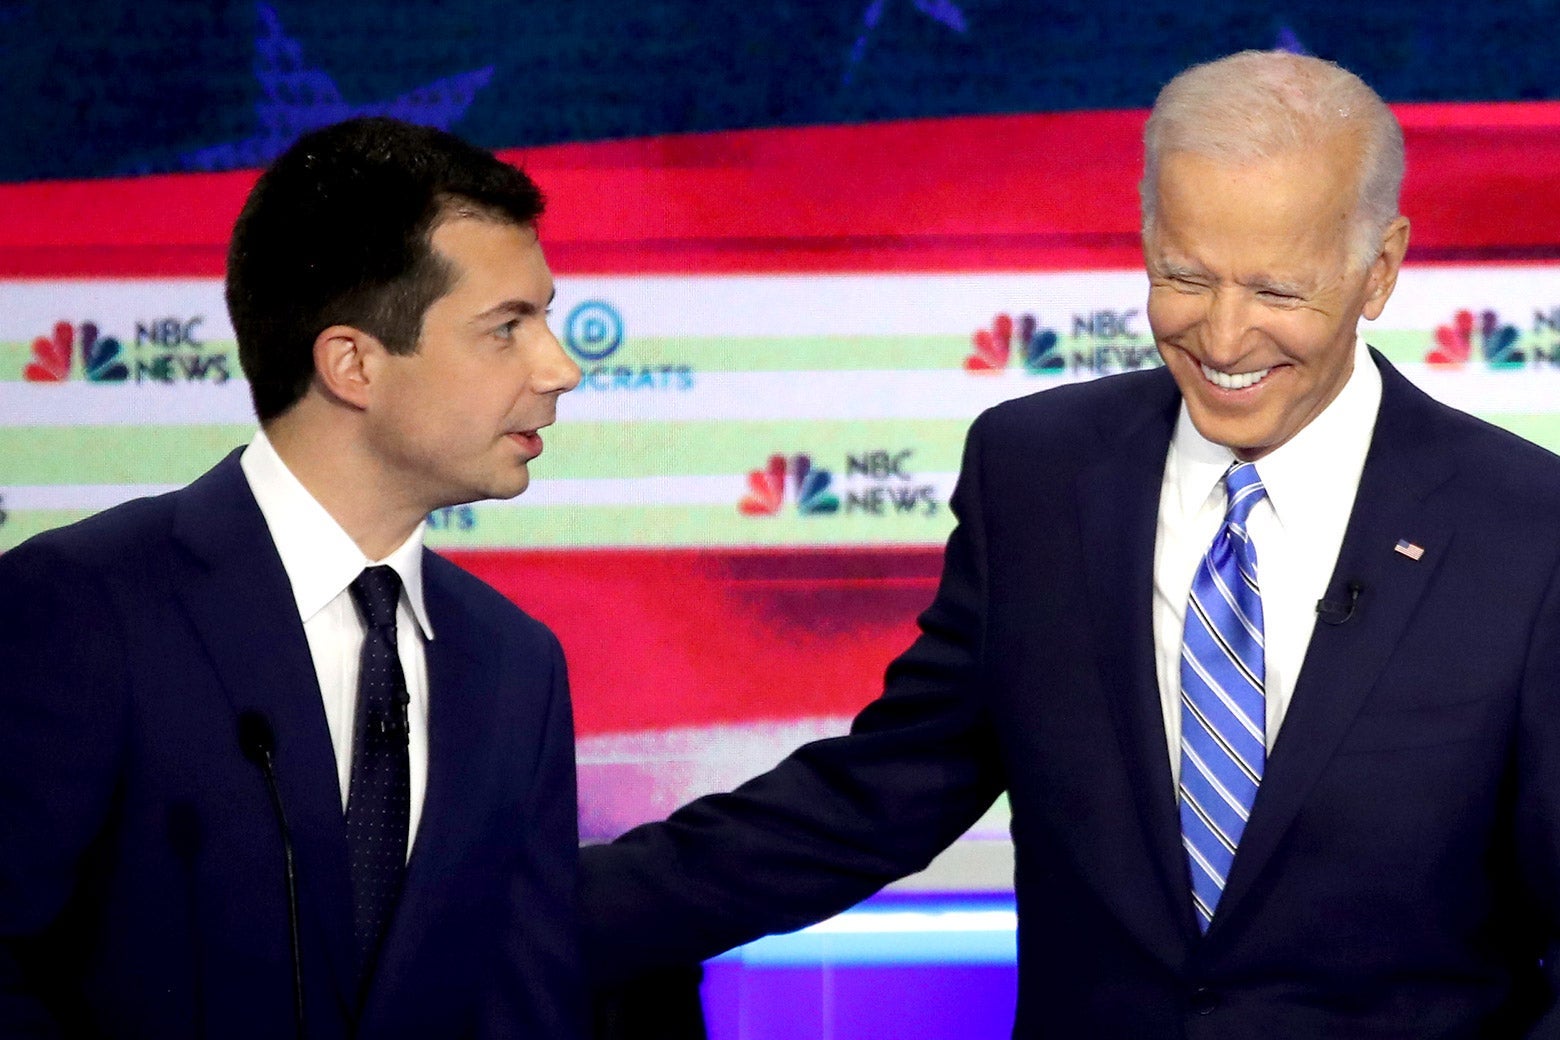 Joe Biden smiles and pats Pete Buttigieg on the back as they both stand on the debate stage.